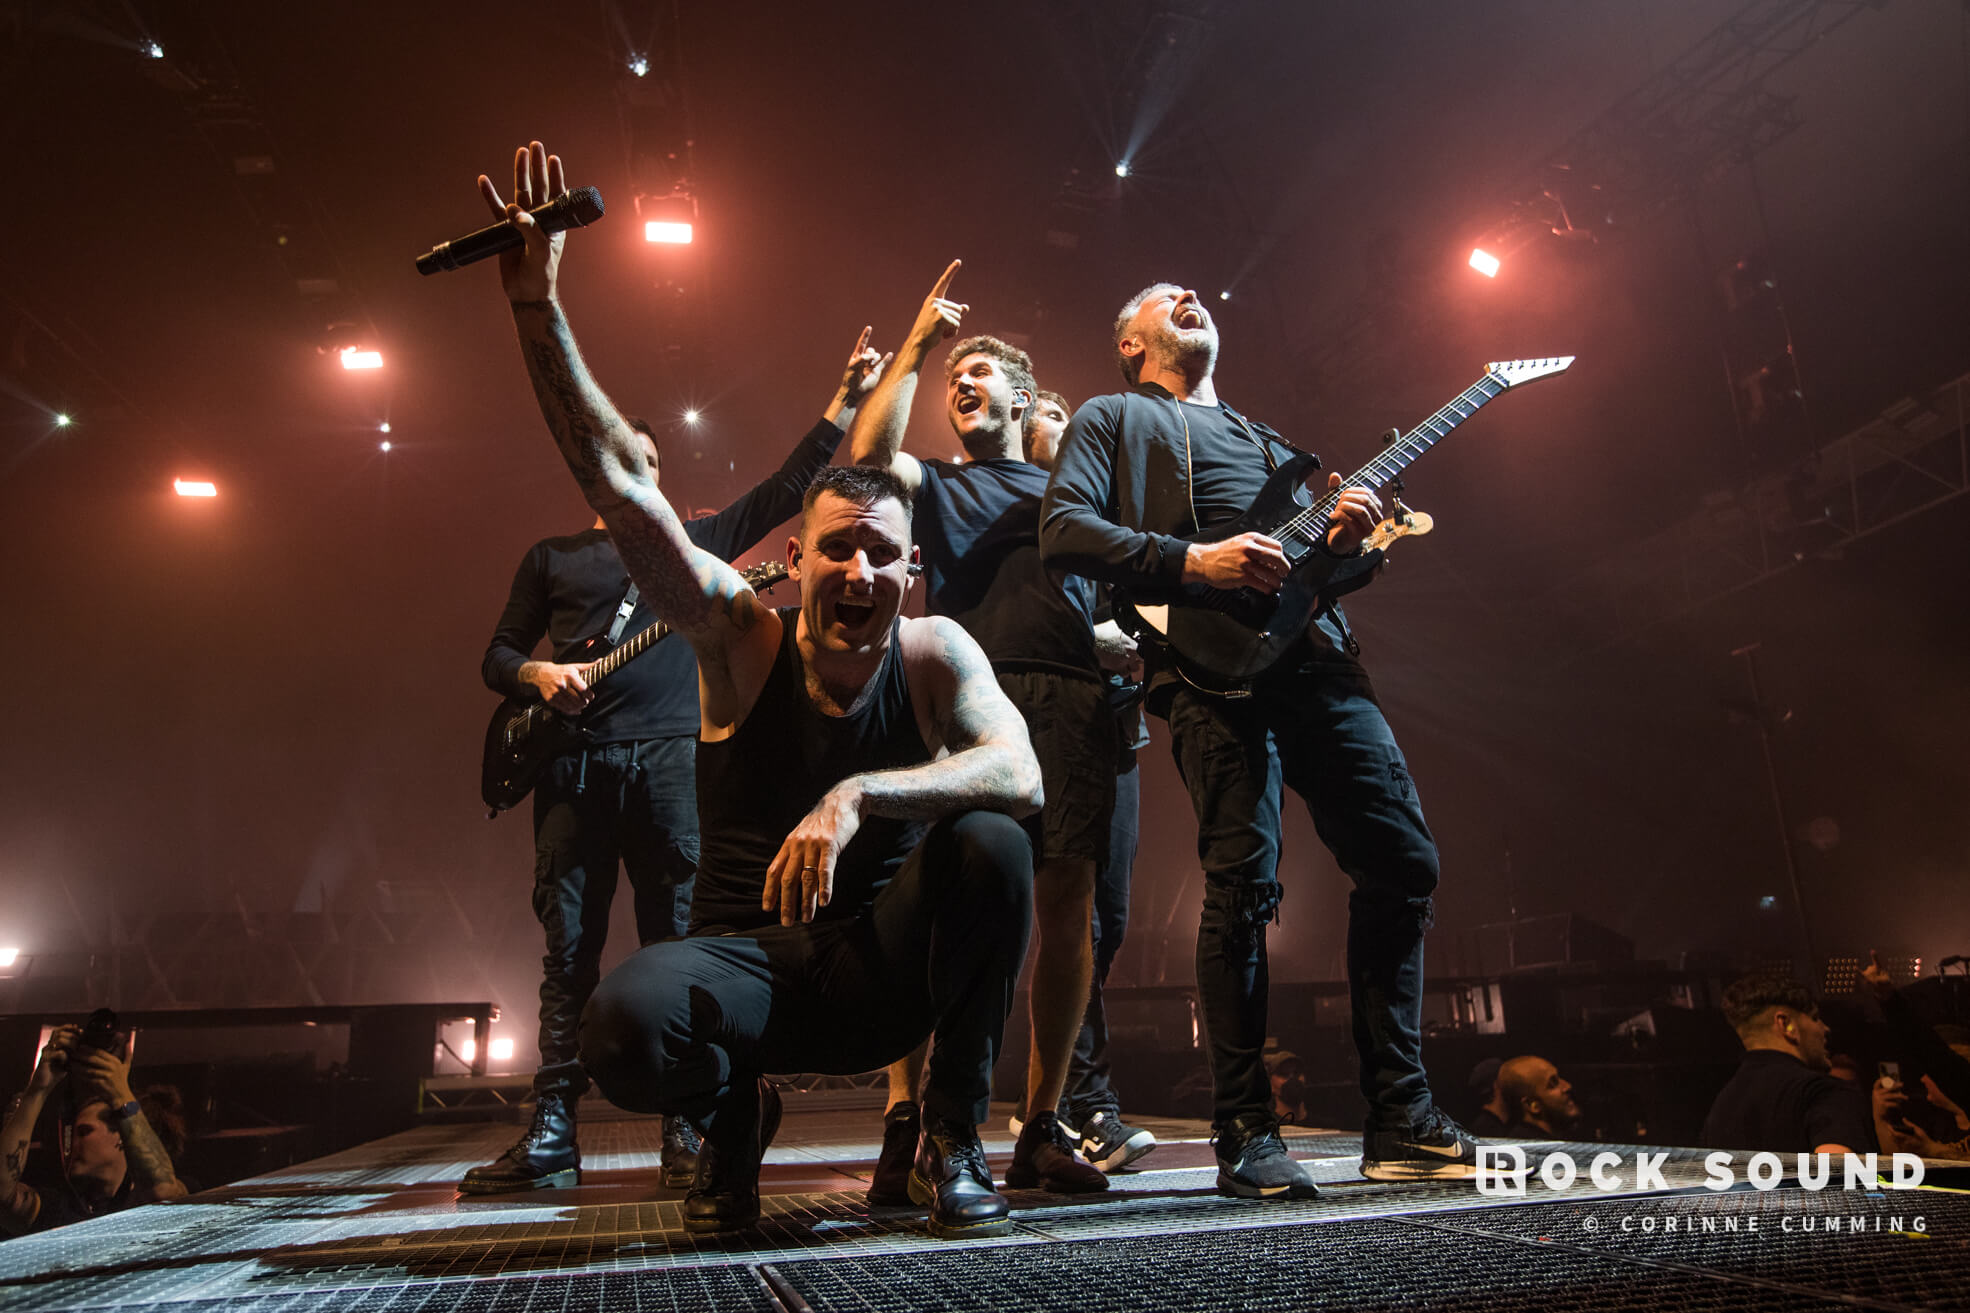 Parkway Drive’s Alexandra Palace Show Was A Triumph For Heavy Music